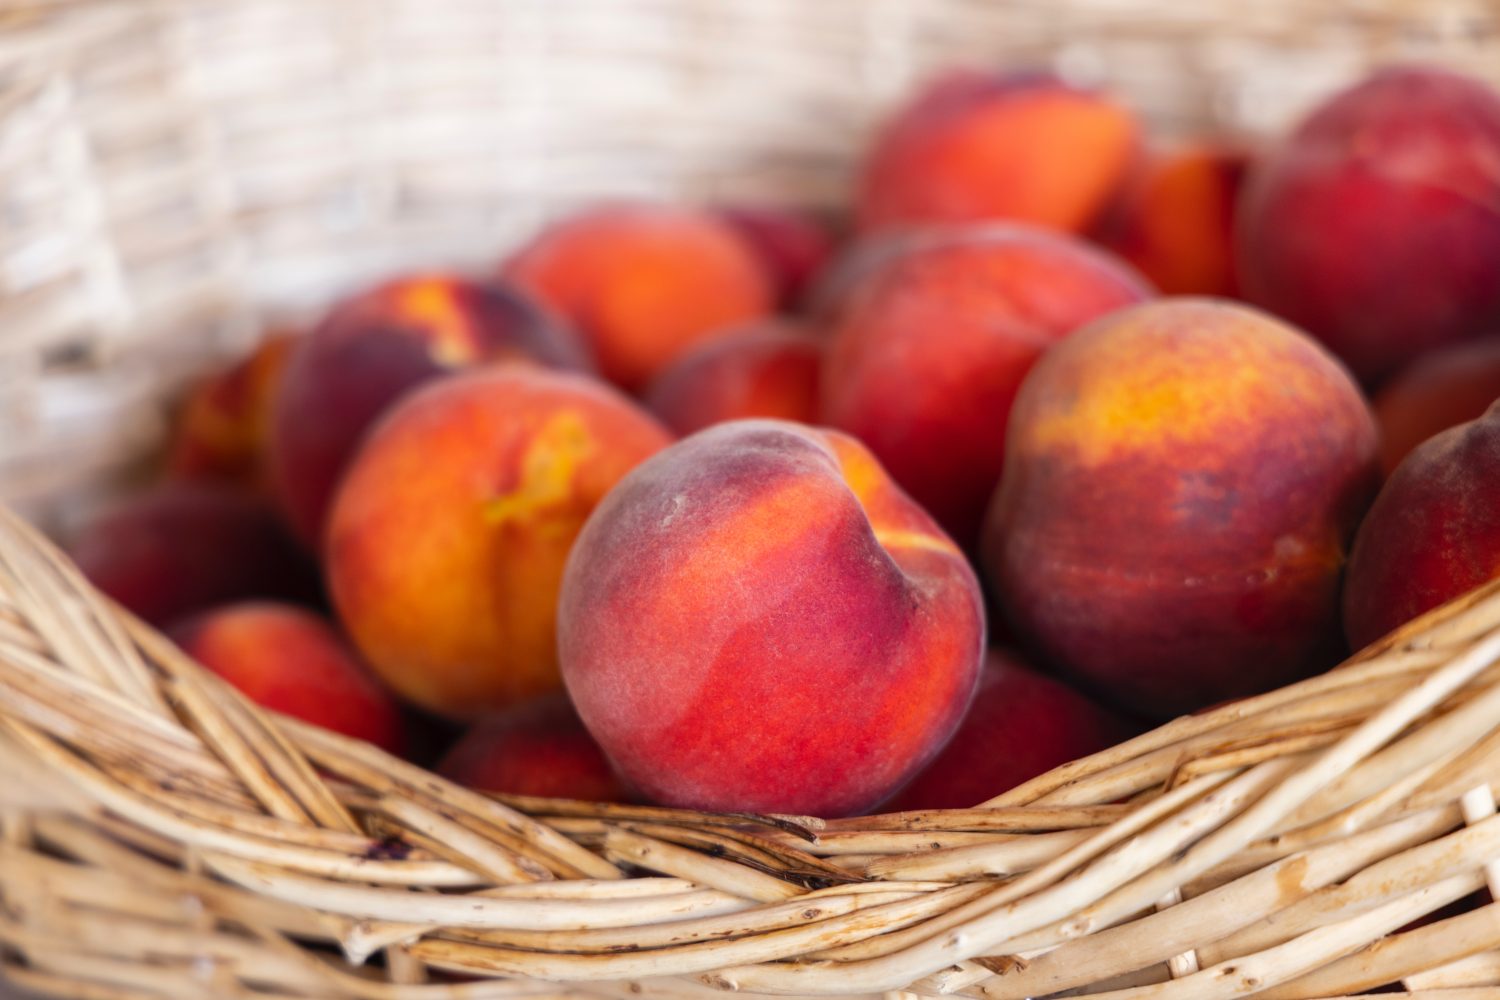 basket-of-peaches